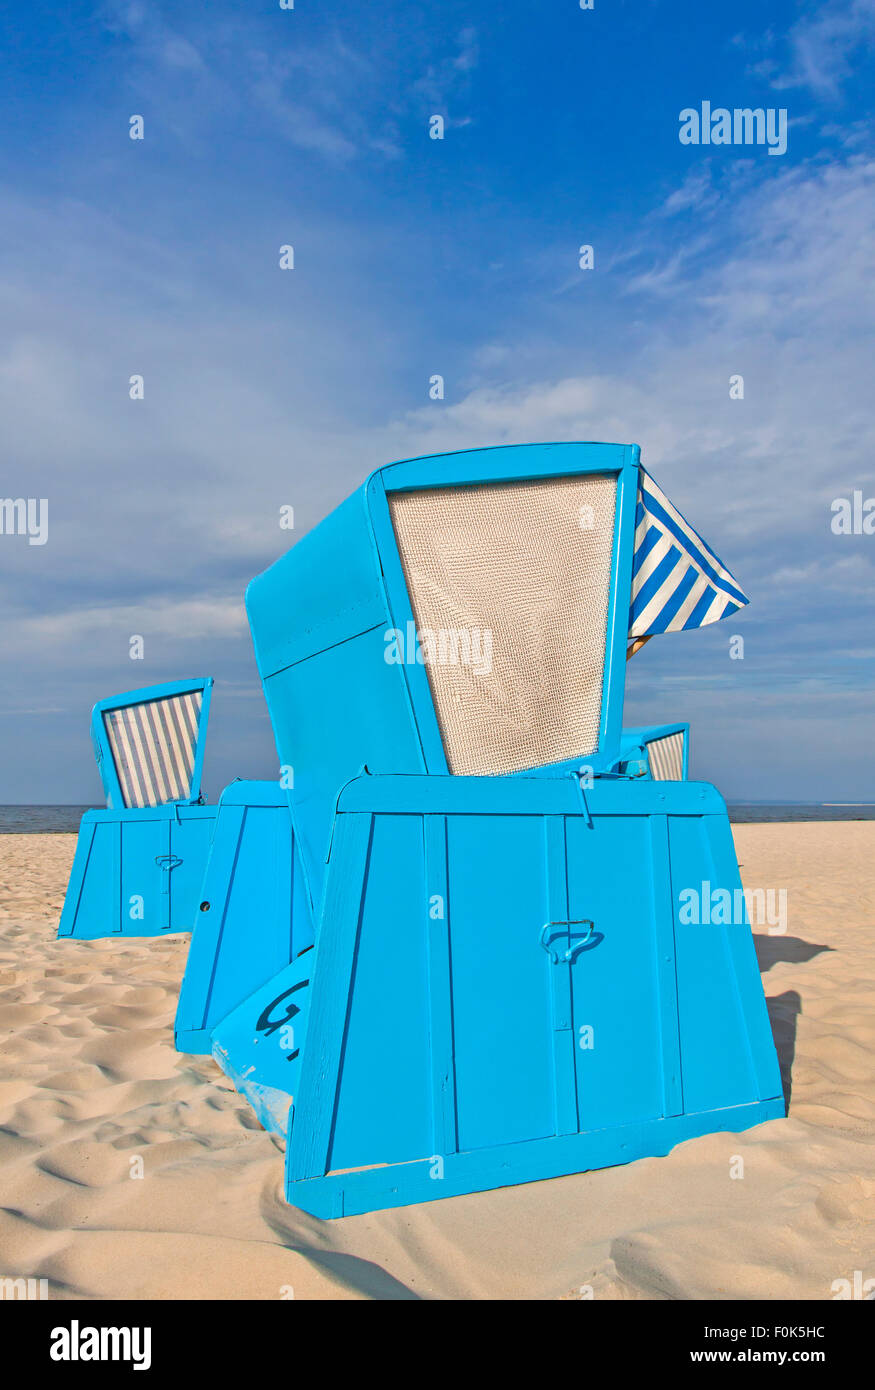 Hooded beach chairs (strandkorb) at the Baltic seacoast in Swinoujscie, Poland Stock Photo